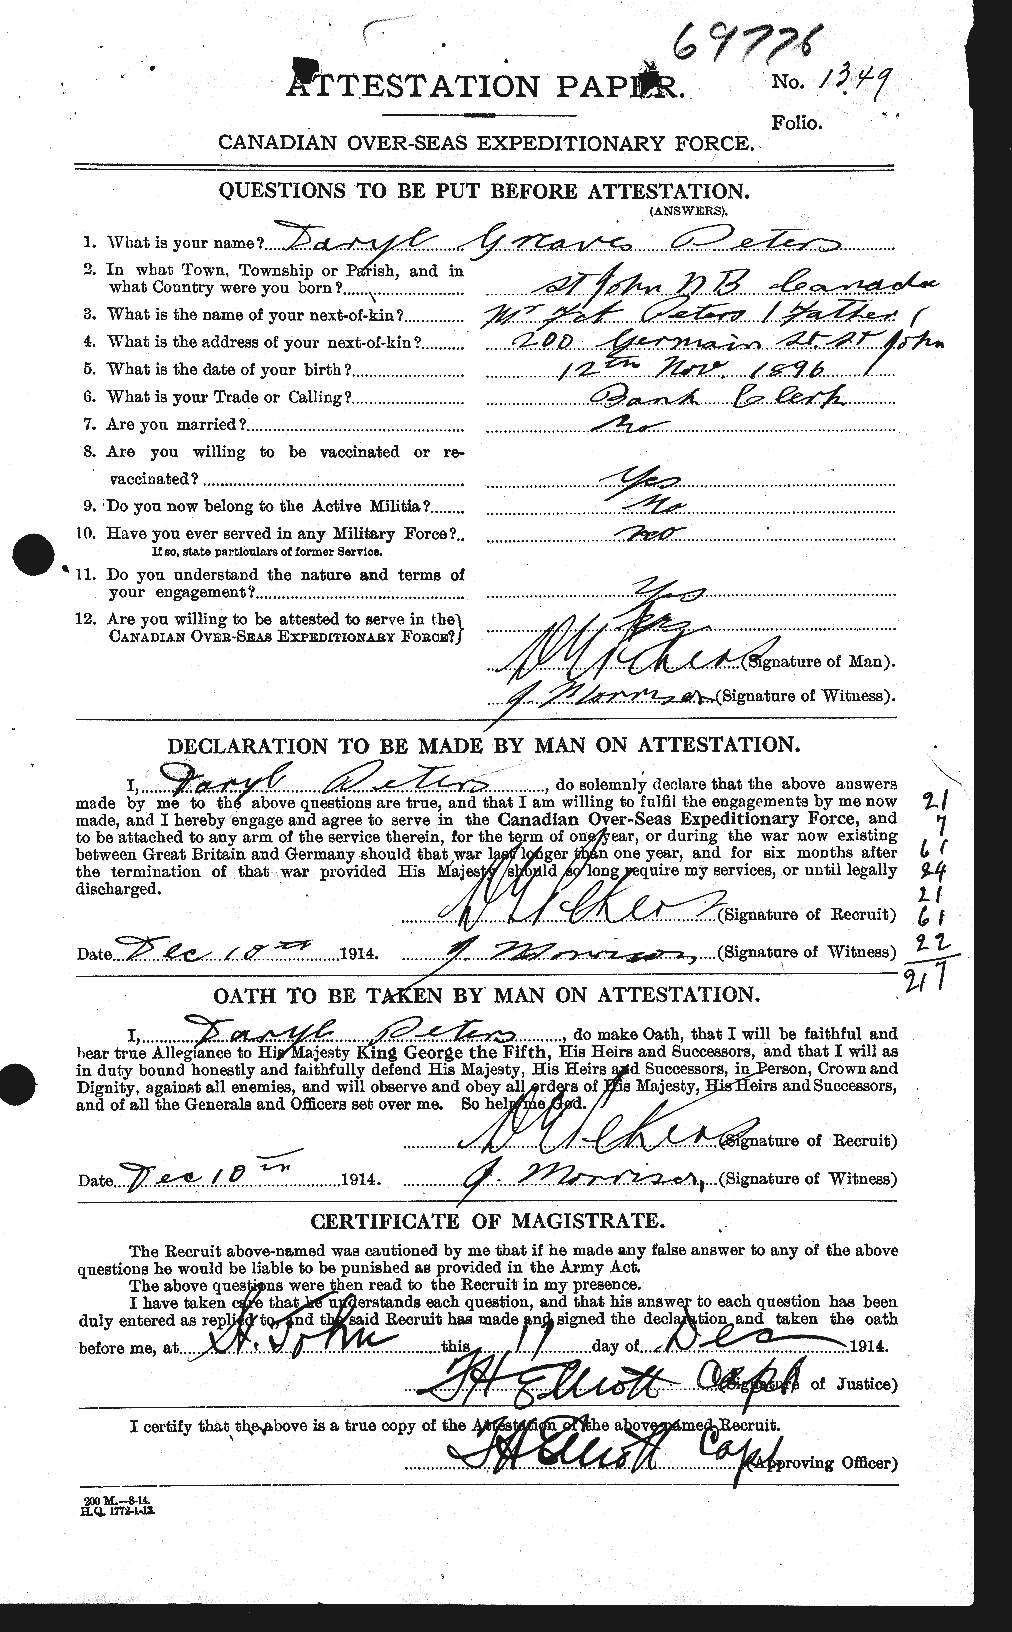 Personnel Records of the First World War - CEF 575386a